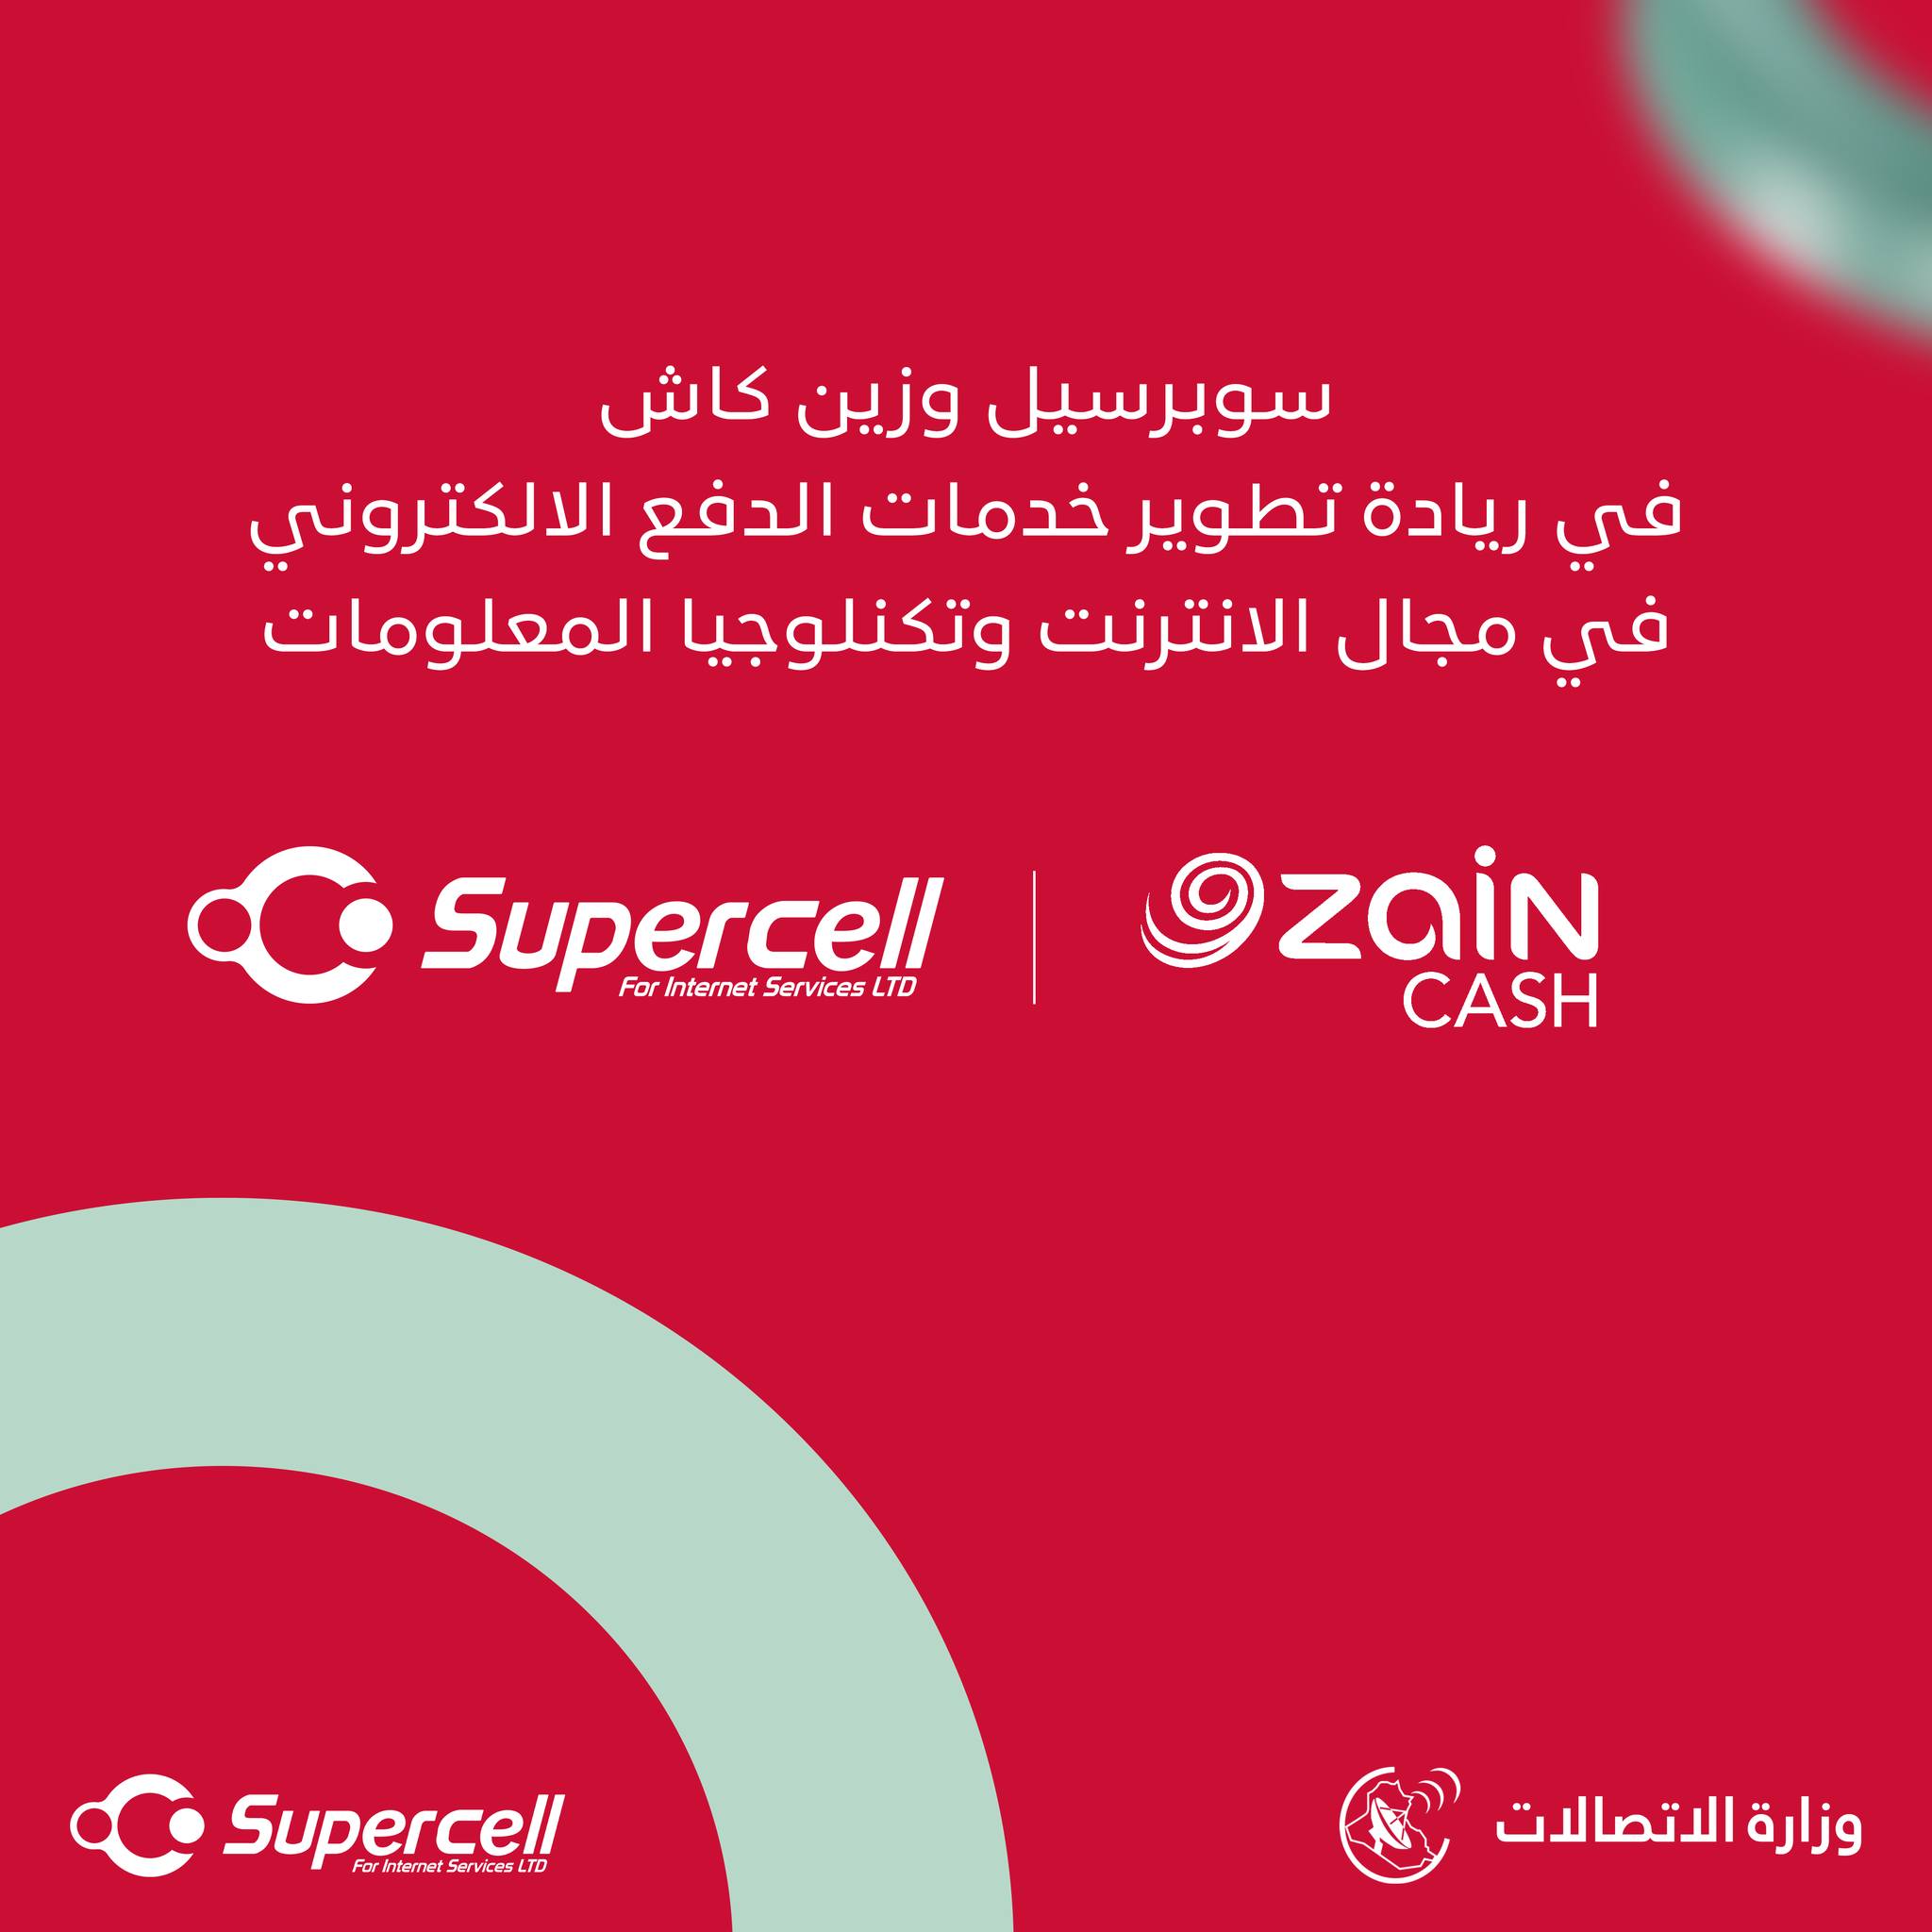 Supercell Network collaboration with Zain Cash